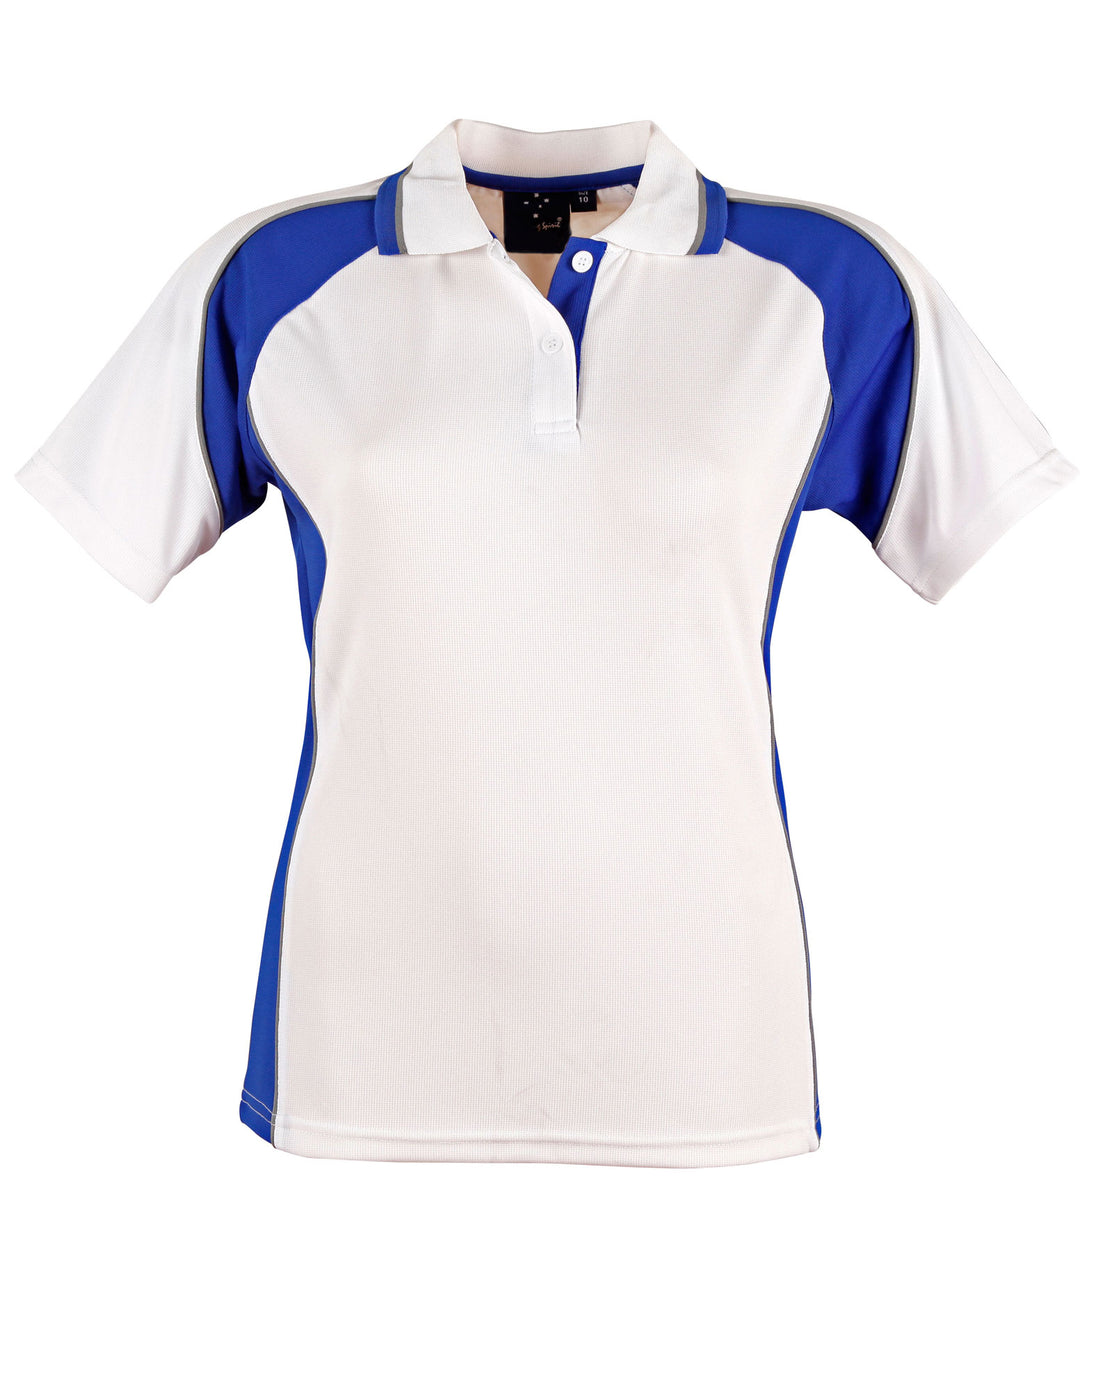 Ladies Winning Spirit polo in blue and white